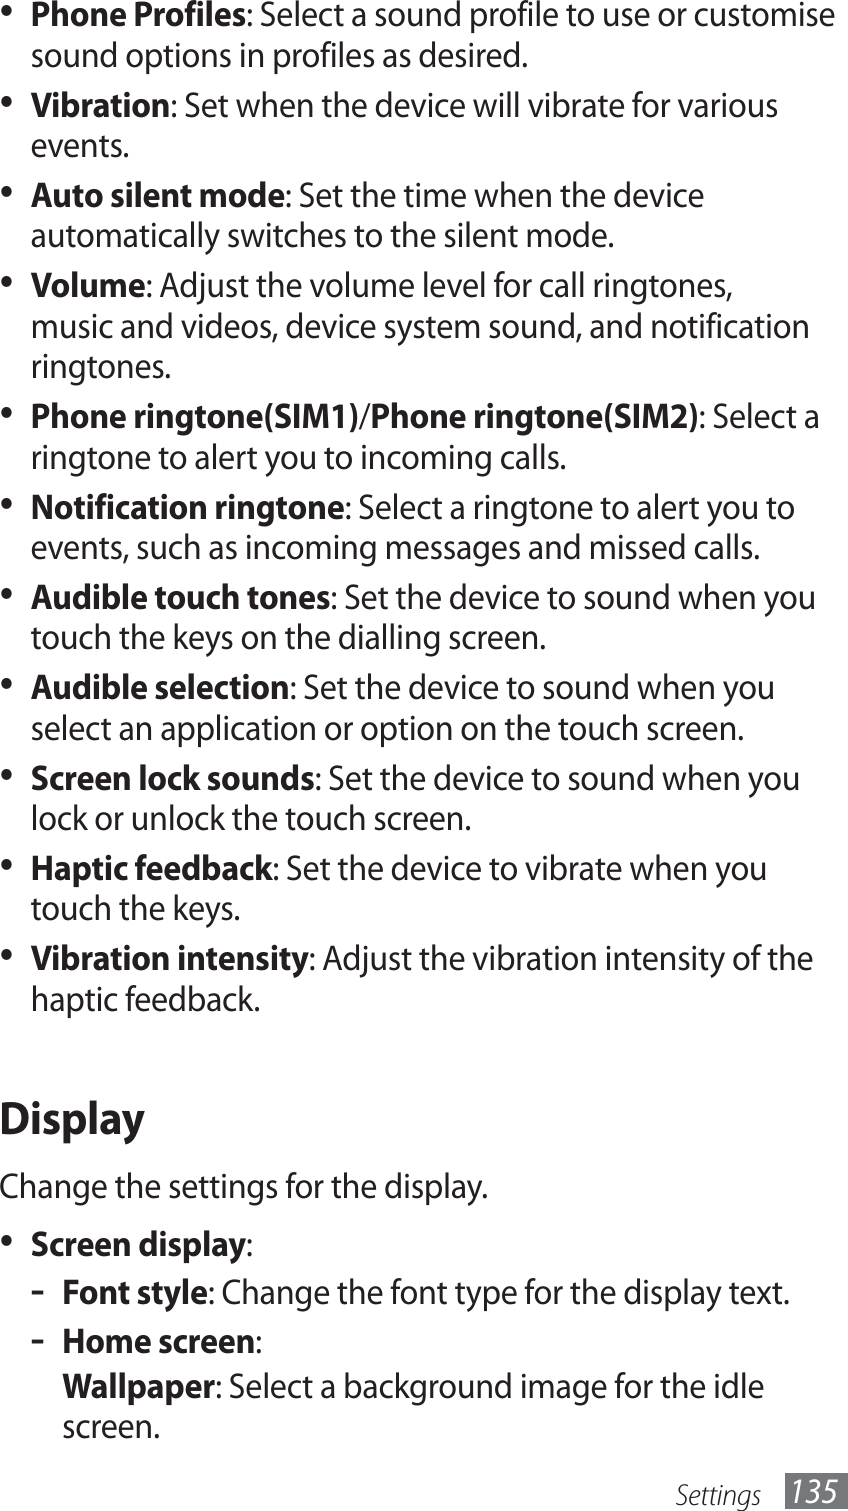 Settings 135Phone Profiles•  : Select a sound profile to use or customise sound options in profiles as desired.Vibration•  : Set when the device will vibrate for various events.Auto silent mode•  : Set the time when the device automatically switches to the silent mode.Volume•  : Adjust the volume level for call ringtones, music and videos, device system sound, and notification ringtones.Phone ringtone(SIM1)•  /Phone ringtone(SIM2): Select a ringtone to alert you to incoming calls.Notification ringtone•  : Select a ringtone to alert you to events, such as incoming messages and missed calls.Audible touch tones•  : Set the device to sound when you touch the keys on the dialling screen.Audible selection•  : Set the device to sound when you select an application or option on the touch screen.Screen lock sounds•  : Set the device to sound when you lock or unlock the touch screen.Haptic feedback•  : Set the device to vibrate when you touch the keys.Vibration intensity•  : Adjust the vibration intensity of the haptic feedback.DisplayChange the settings for the display.Screen display•  :Font style - : Change the font type for the display text.Home screen - :Wallpaper: Select a background image for the idle screen.